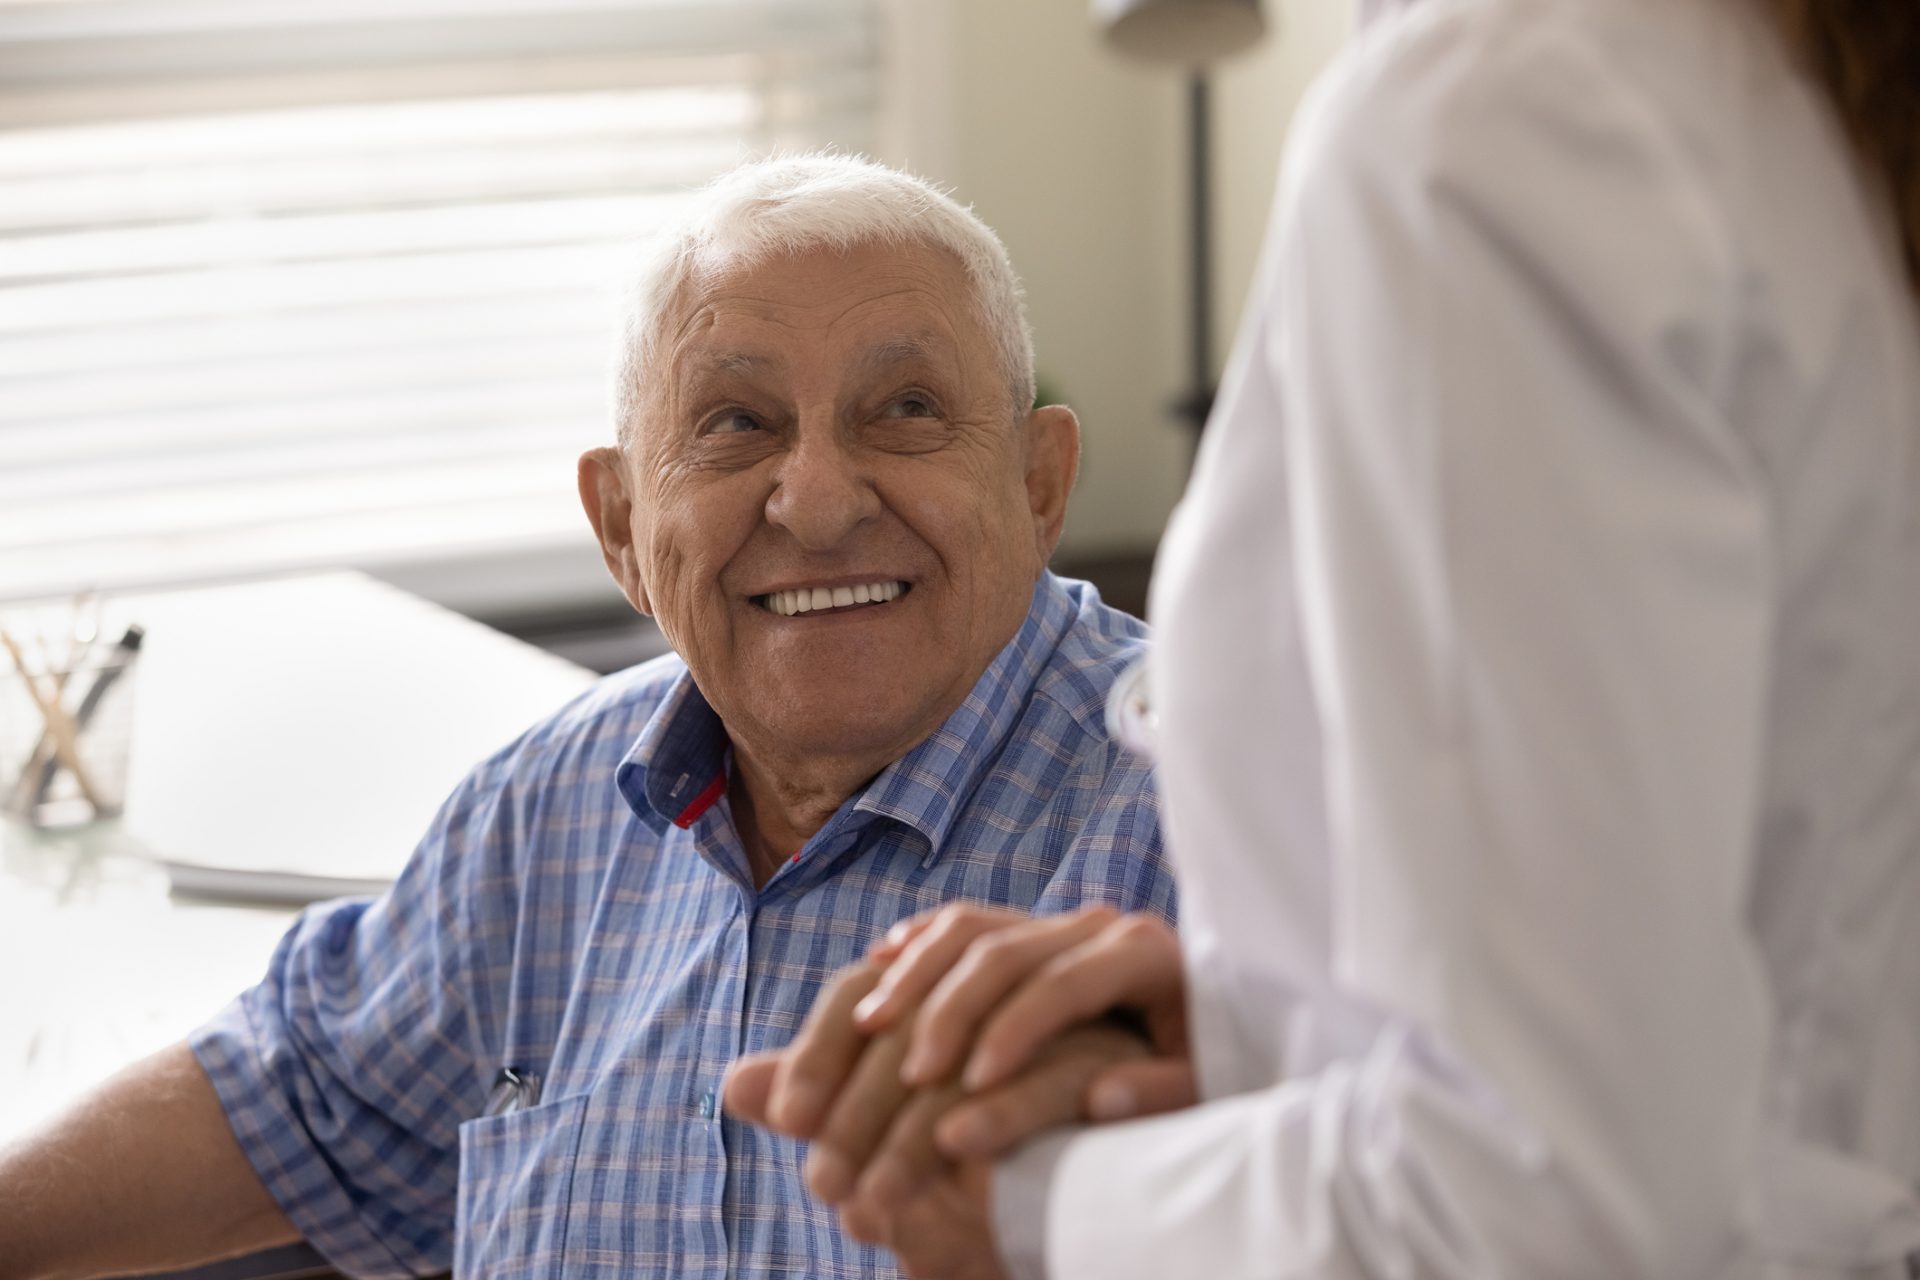 Elderly man smiling at a healthcare professional who is holding his hands